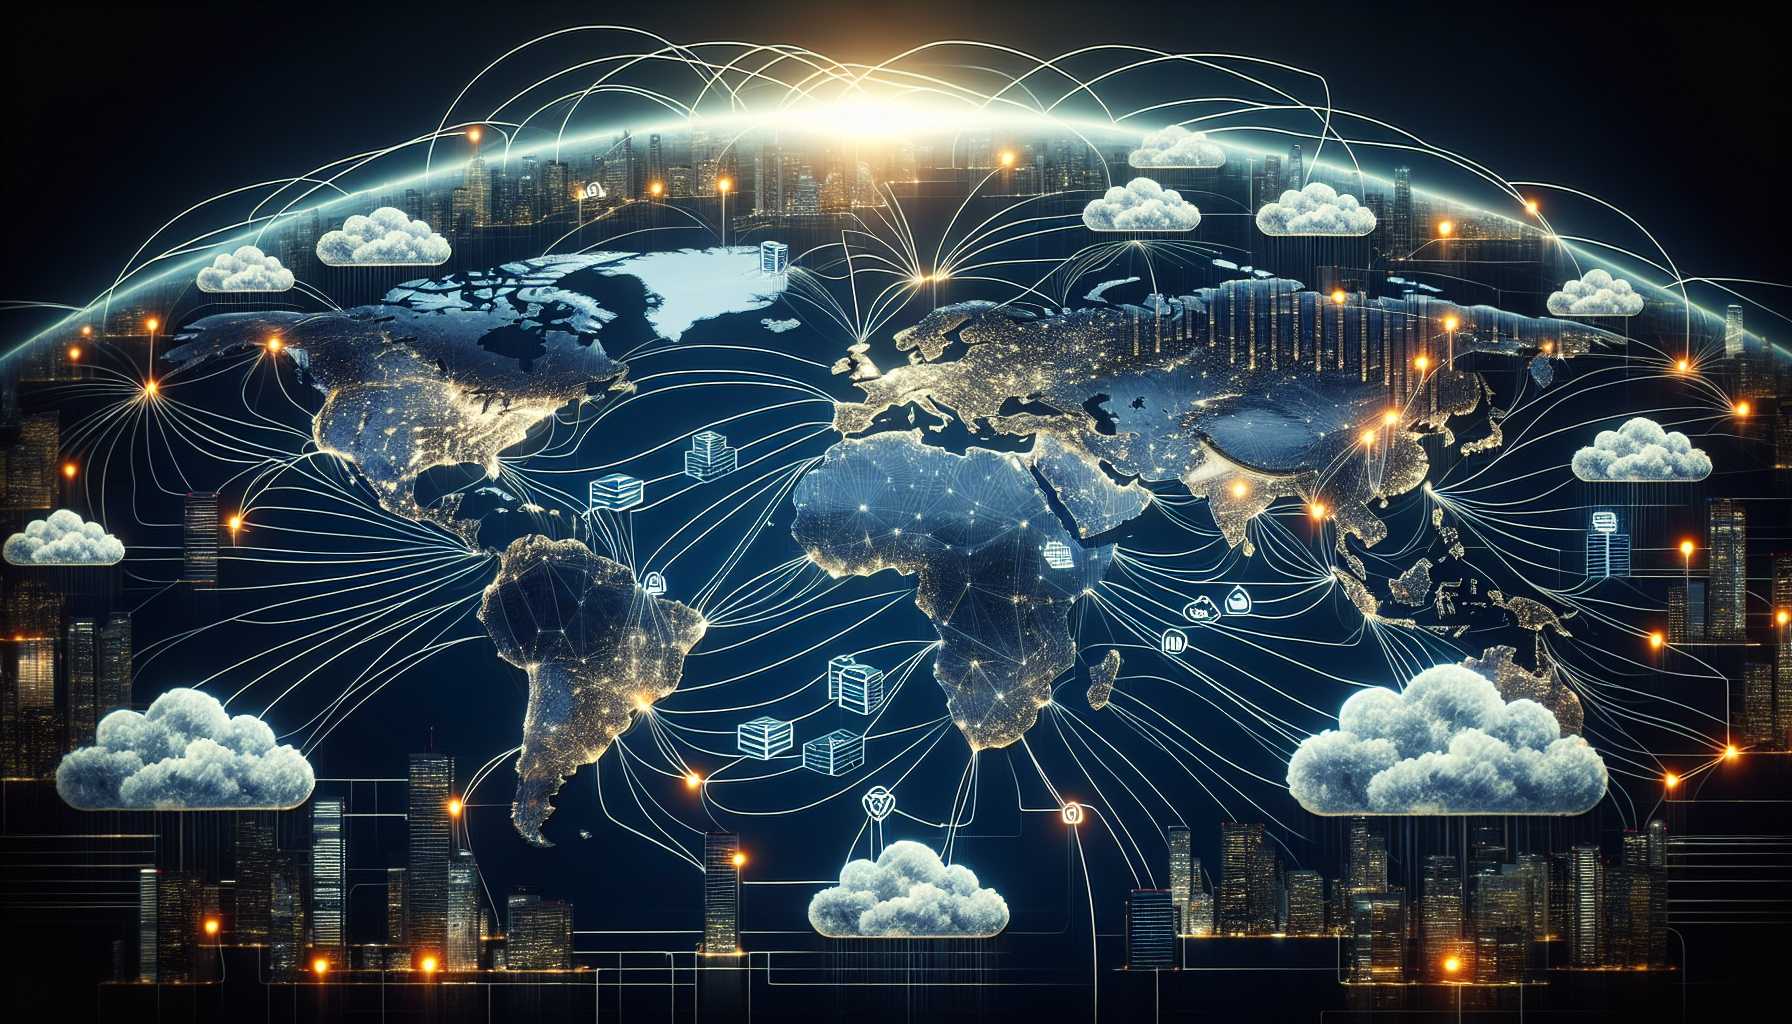 Amazon Web Services (AWS) cloud infrastructure depicted on a global network